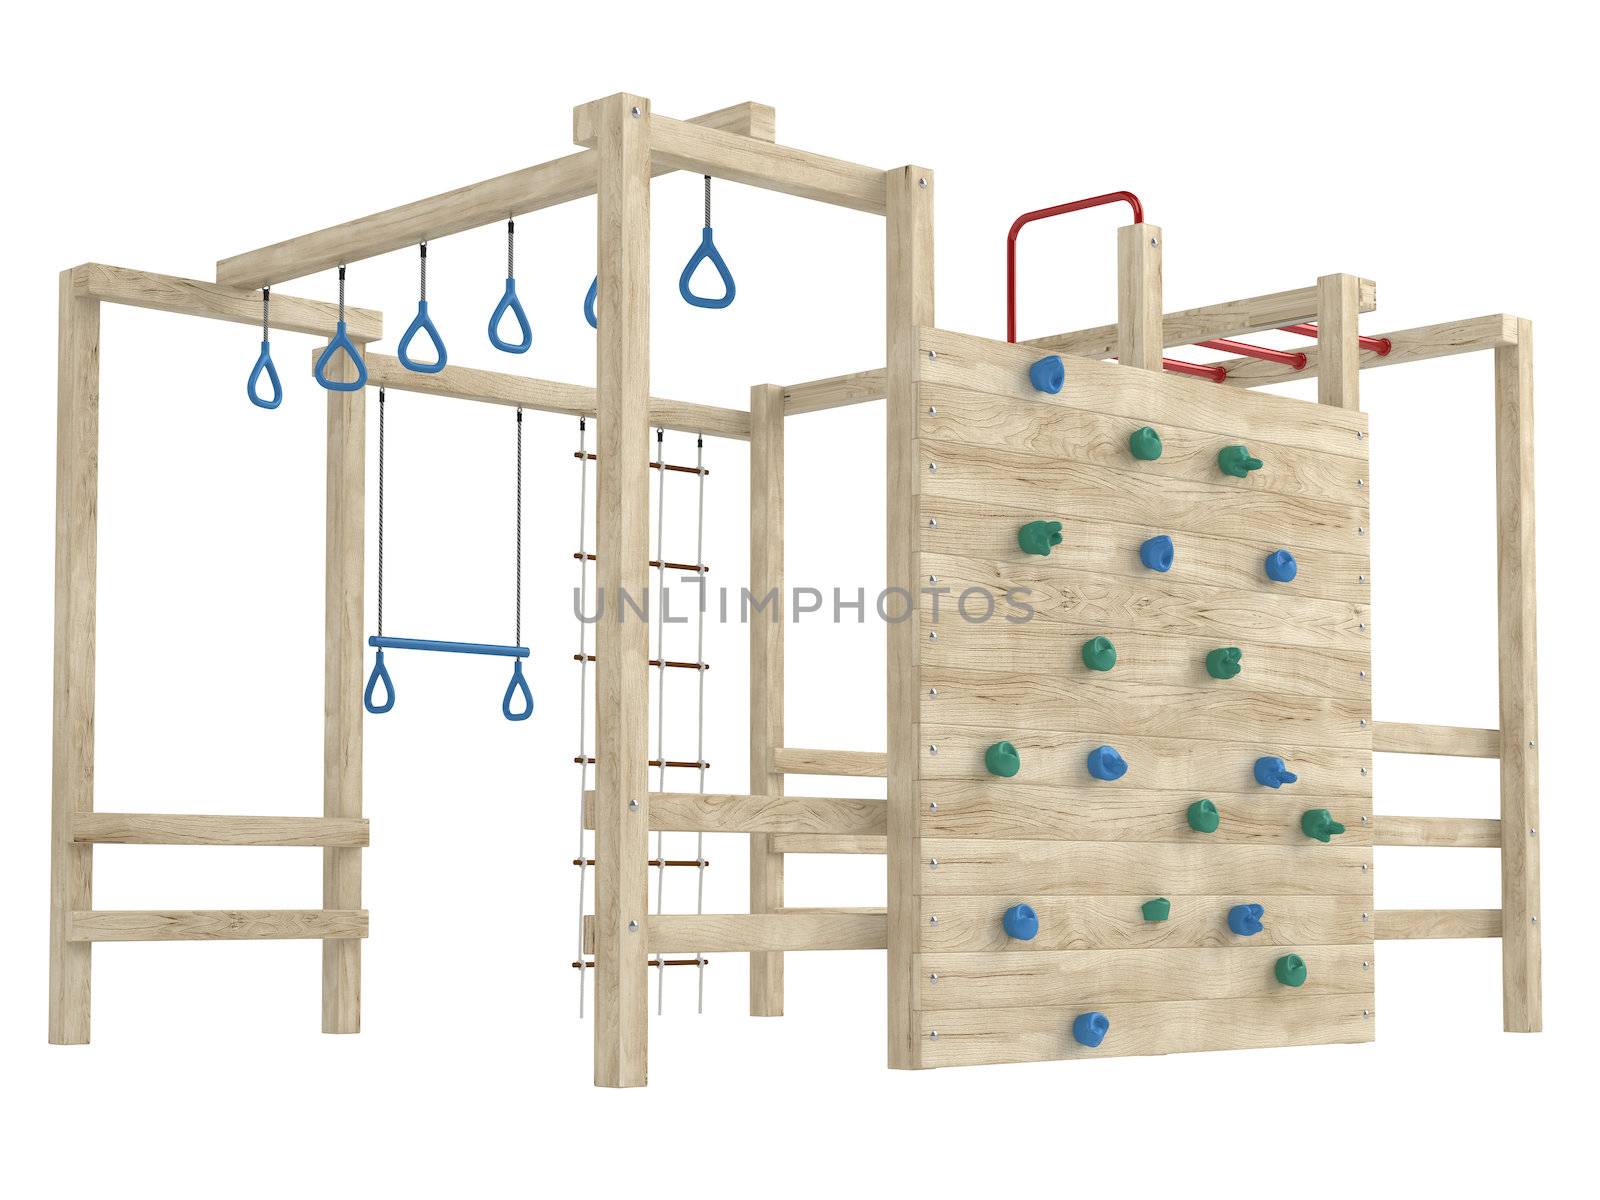 Wooden jungle gym or climbing frame with handholds, footholds and ropes isolated on a white background